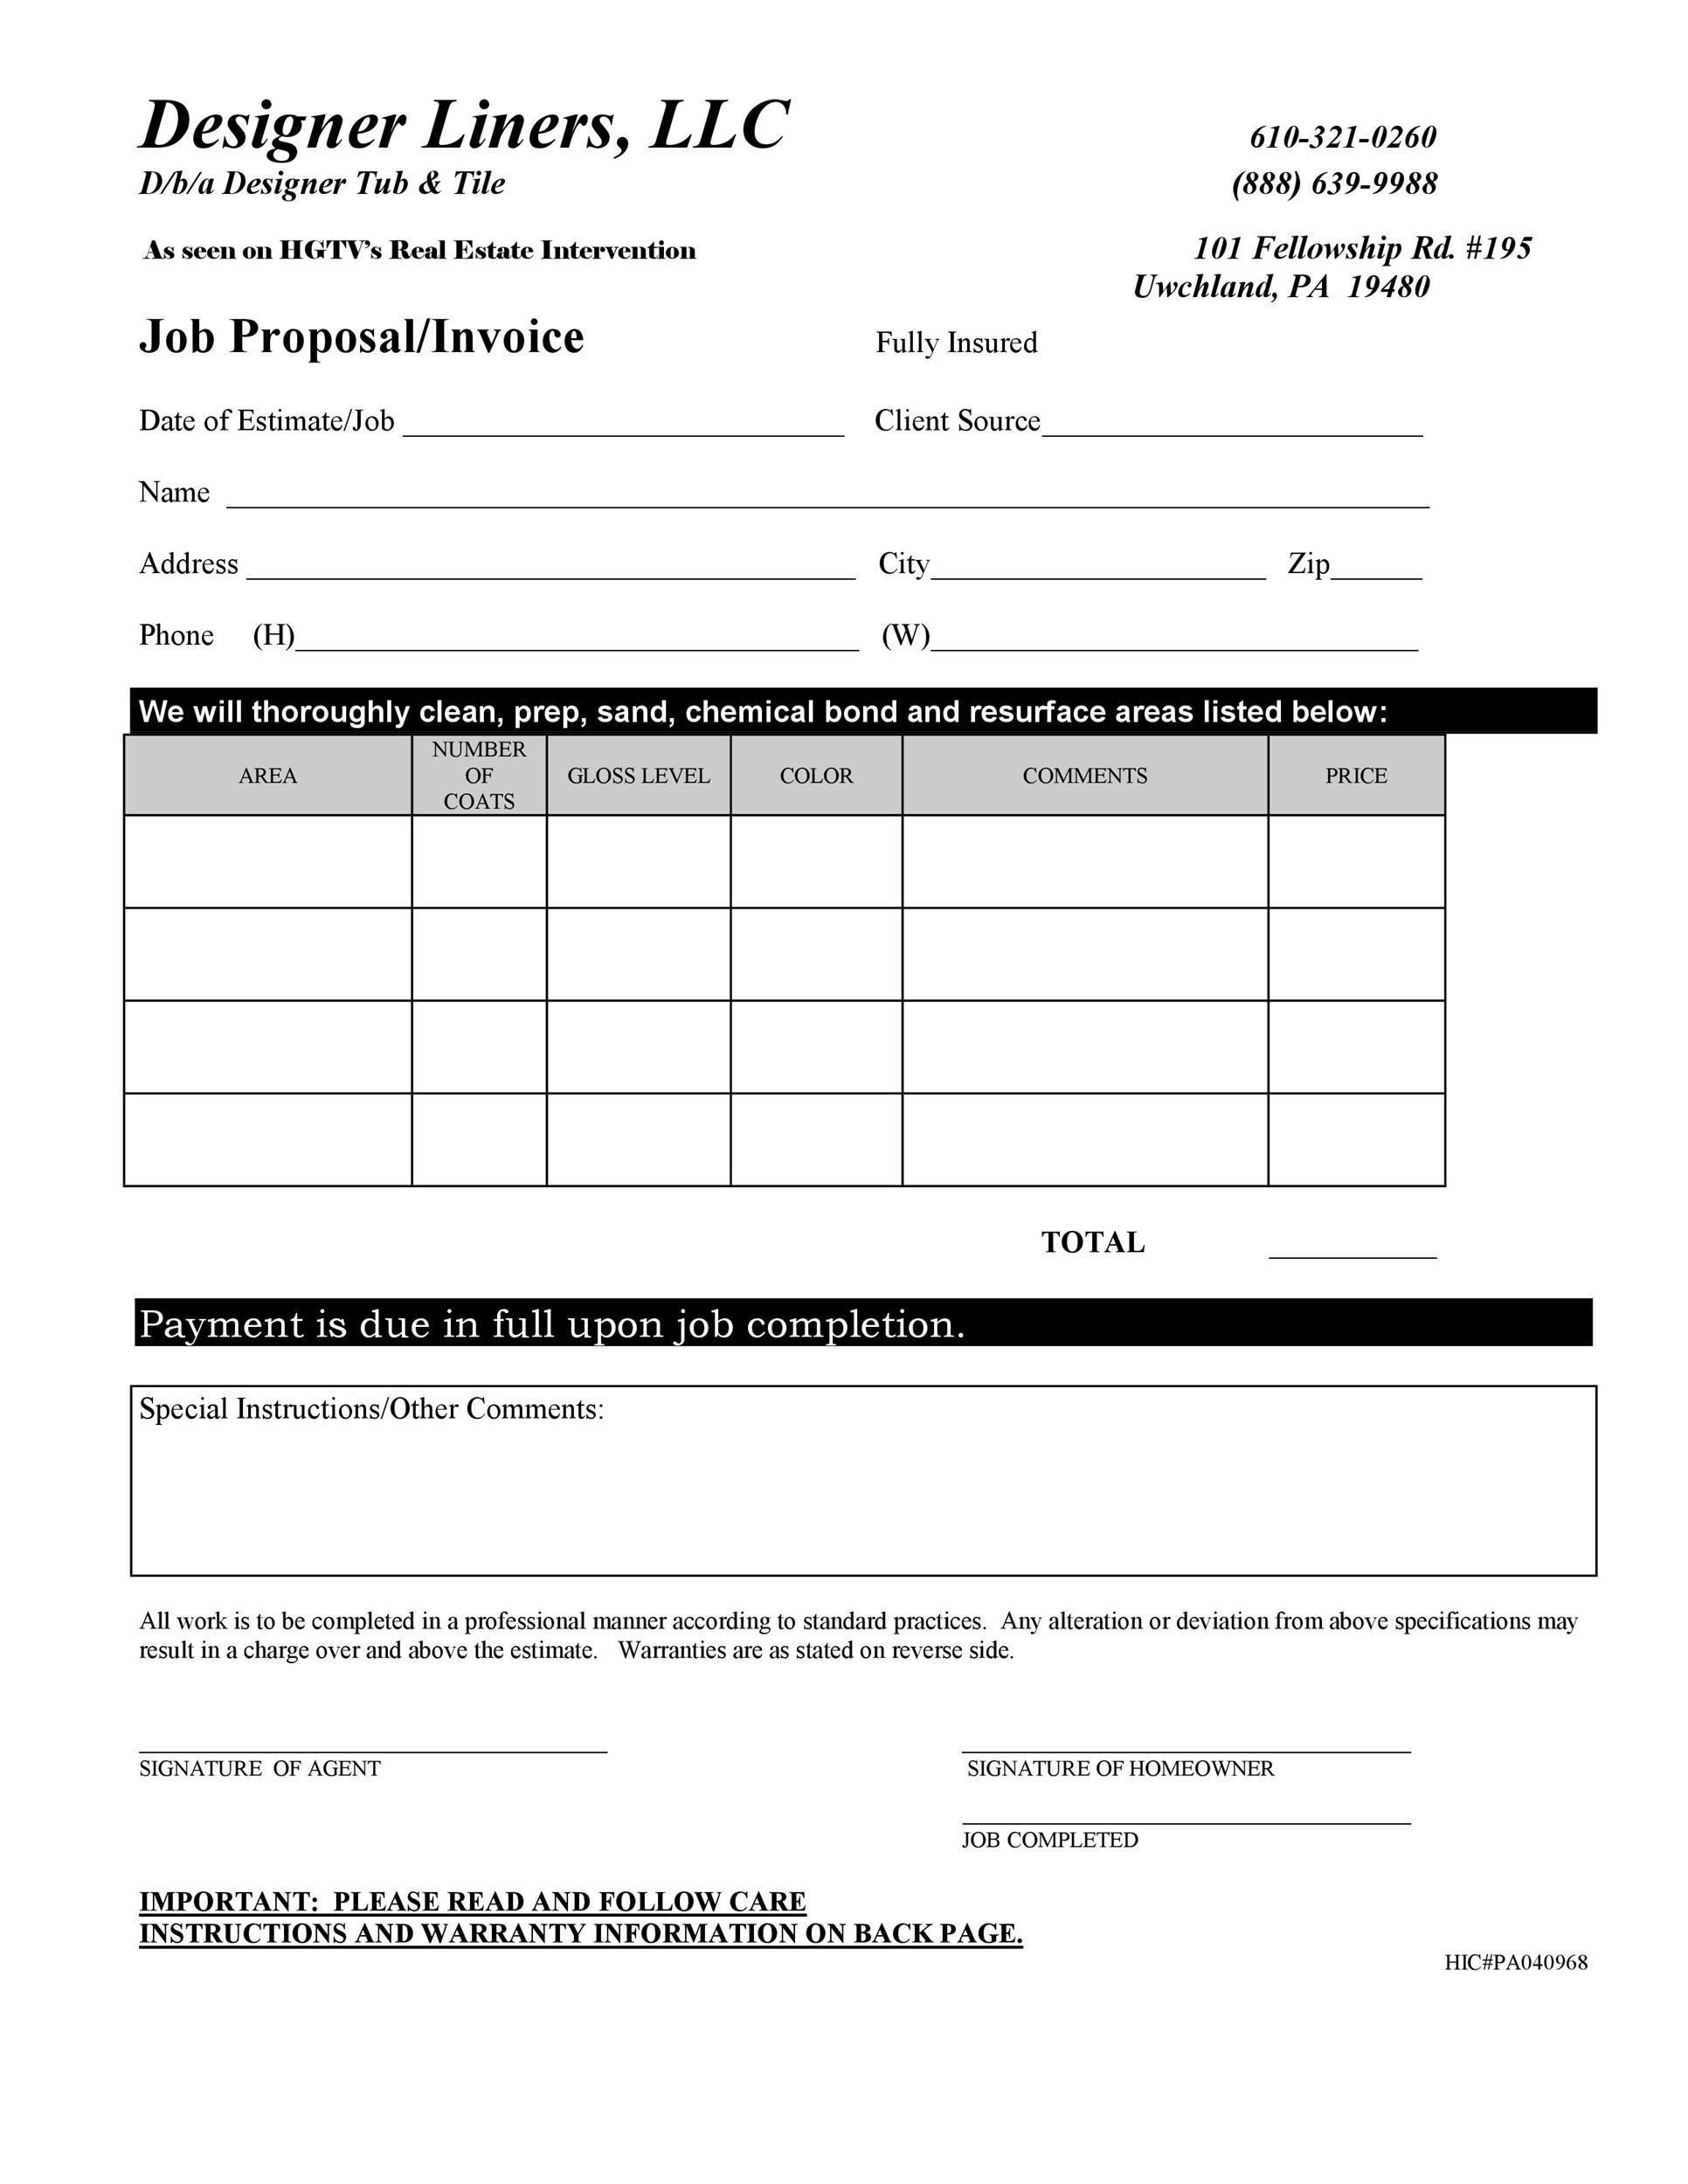 printable-proposal-forms-tutore-org-master-of-documents